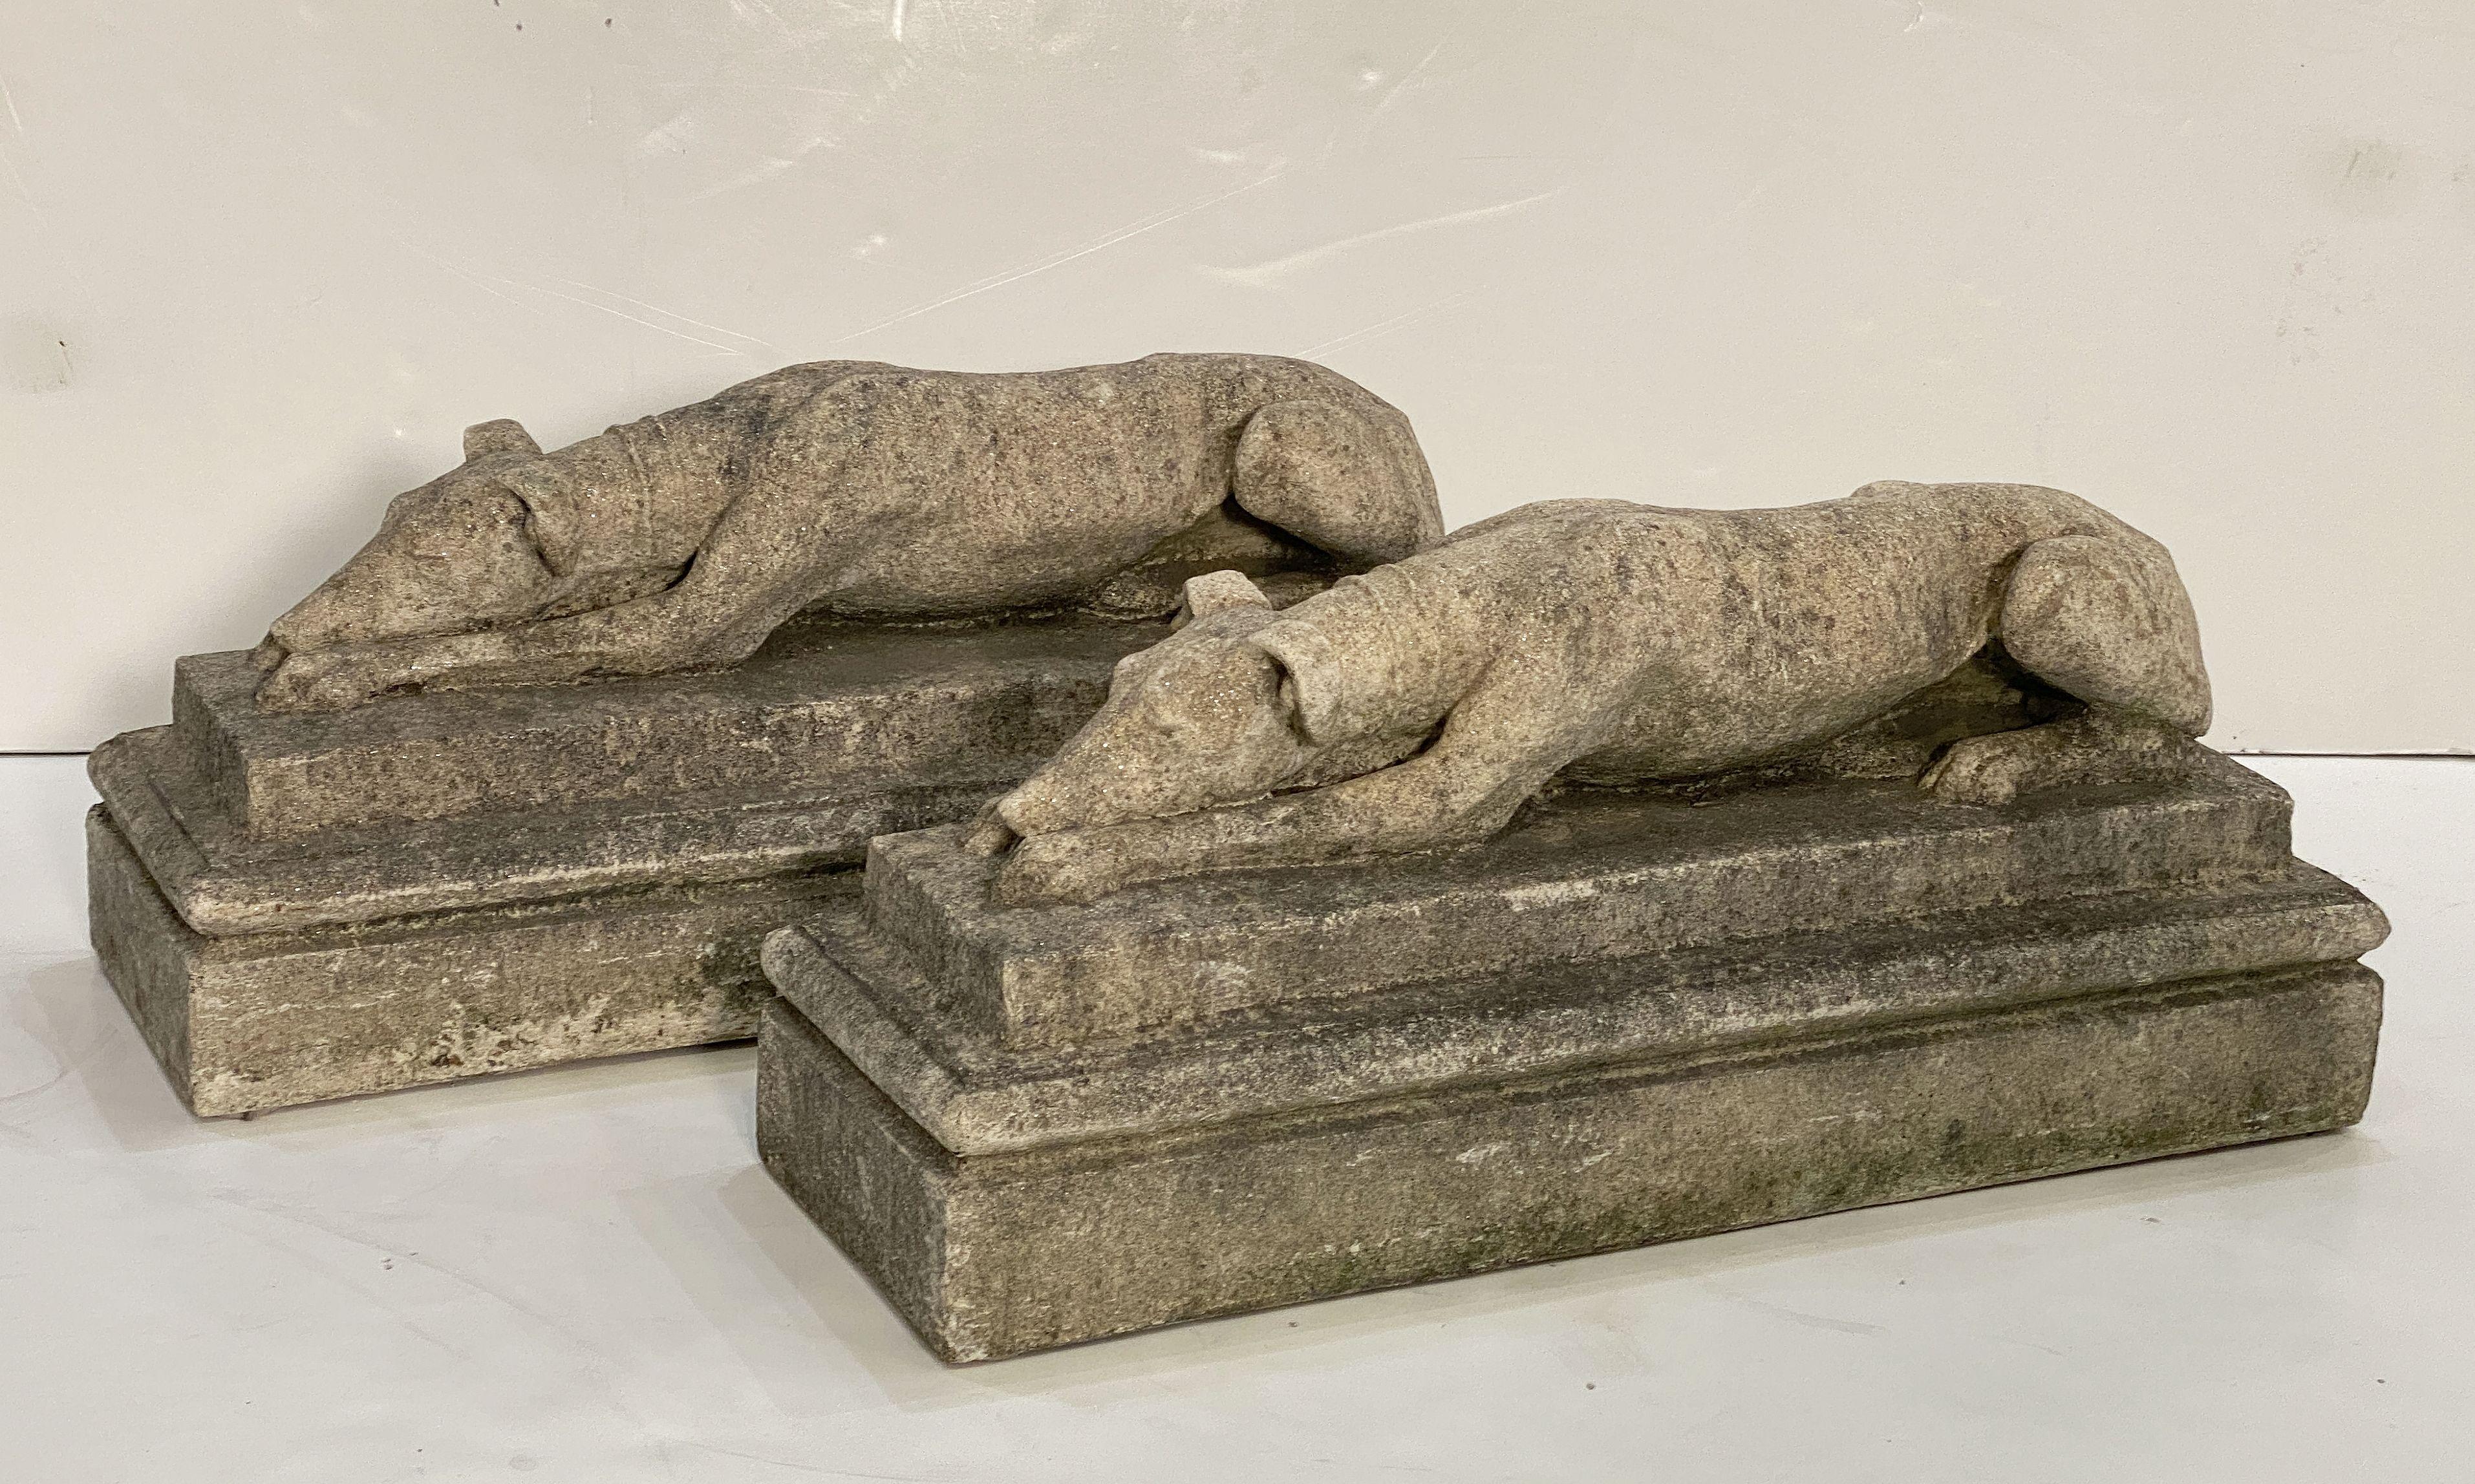 A pair of finely modeled English garden stone whippets or greyhound dogs in a recumbent position on long rectangular raised platform bases, each with collar around the neck.

Perfect for a garden or door entrance.

Two available - Individually